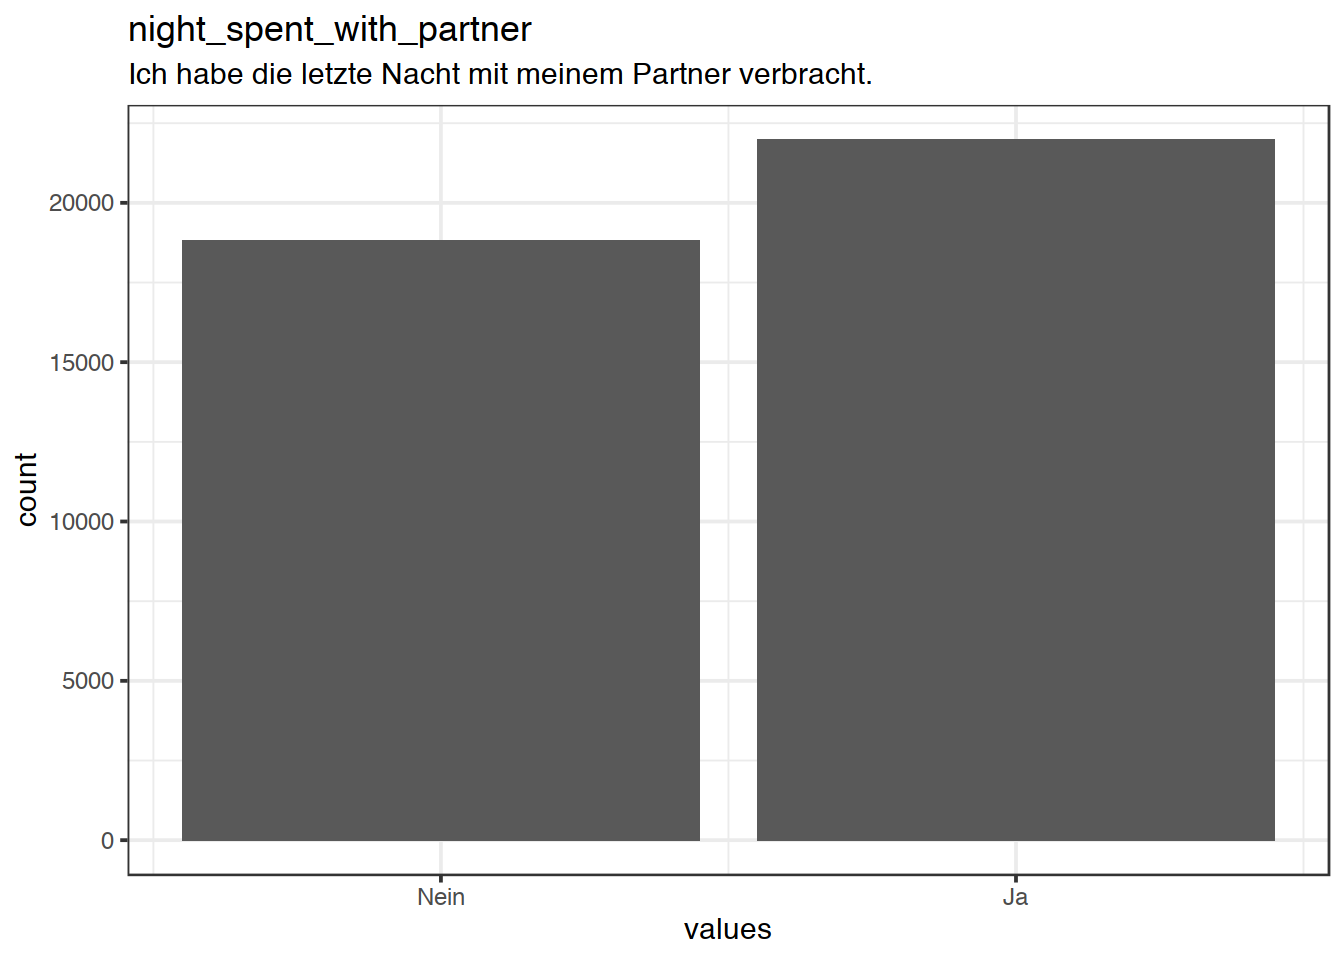 Distribution of values for night_spent_with_partner